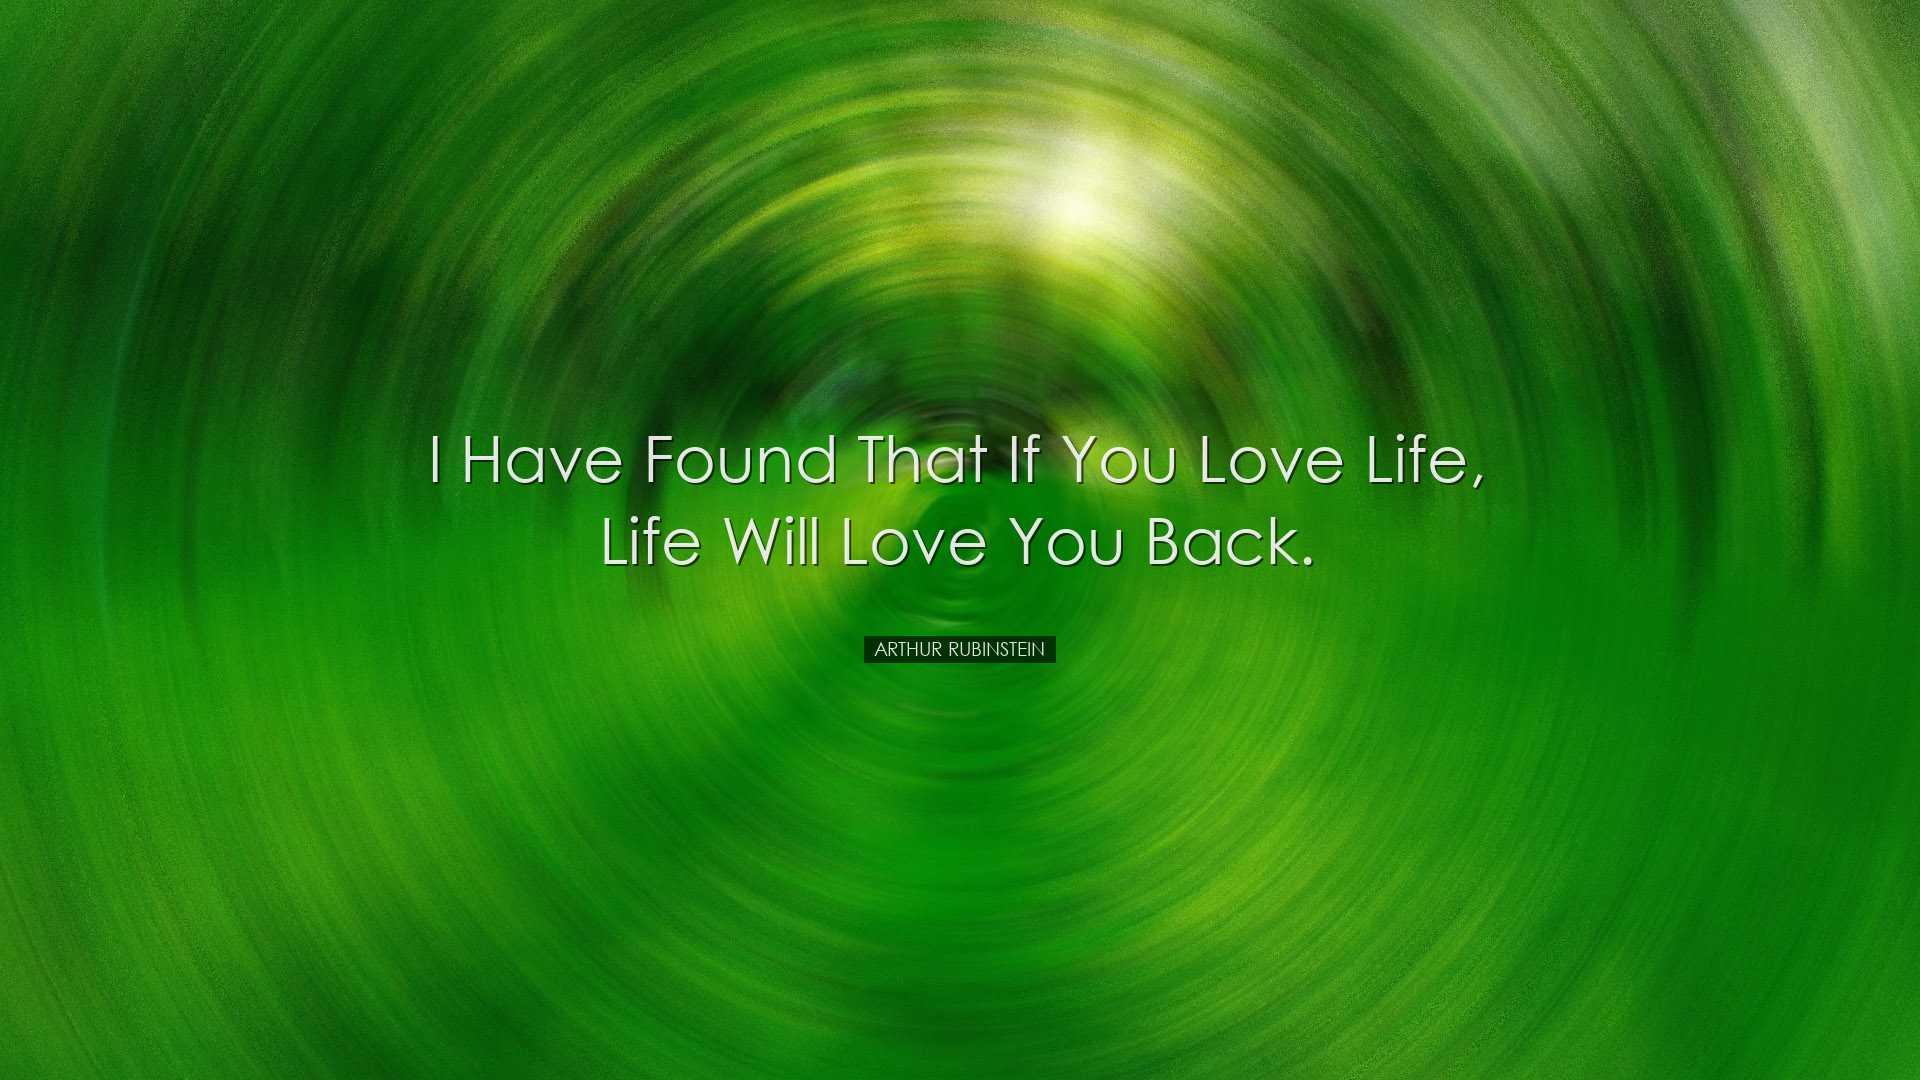 I have found that if you love life, life will love you back. - Art